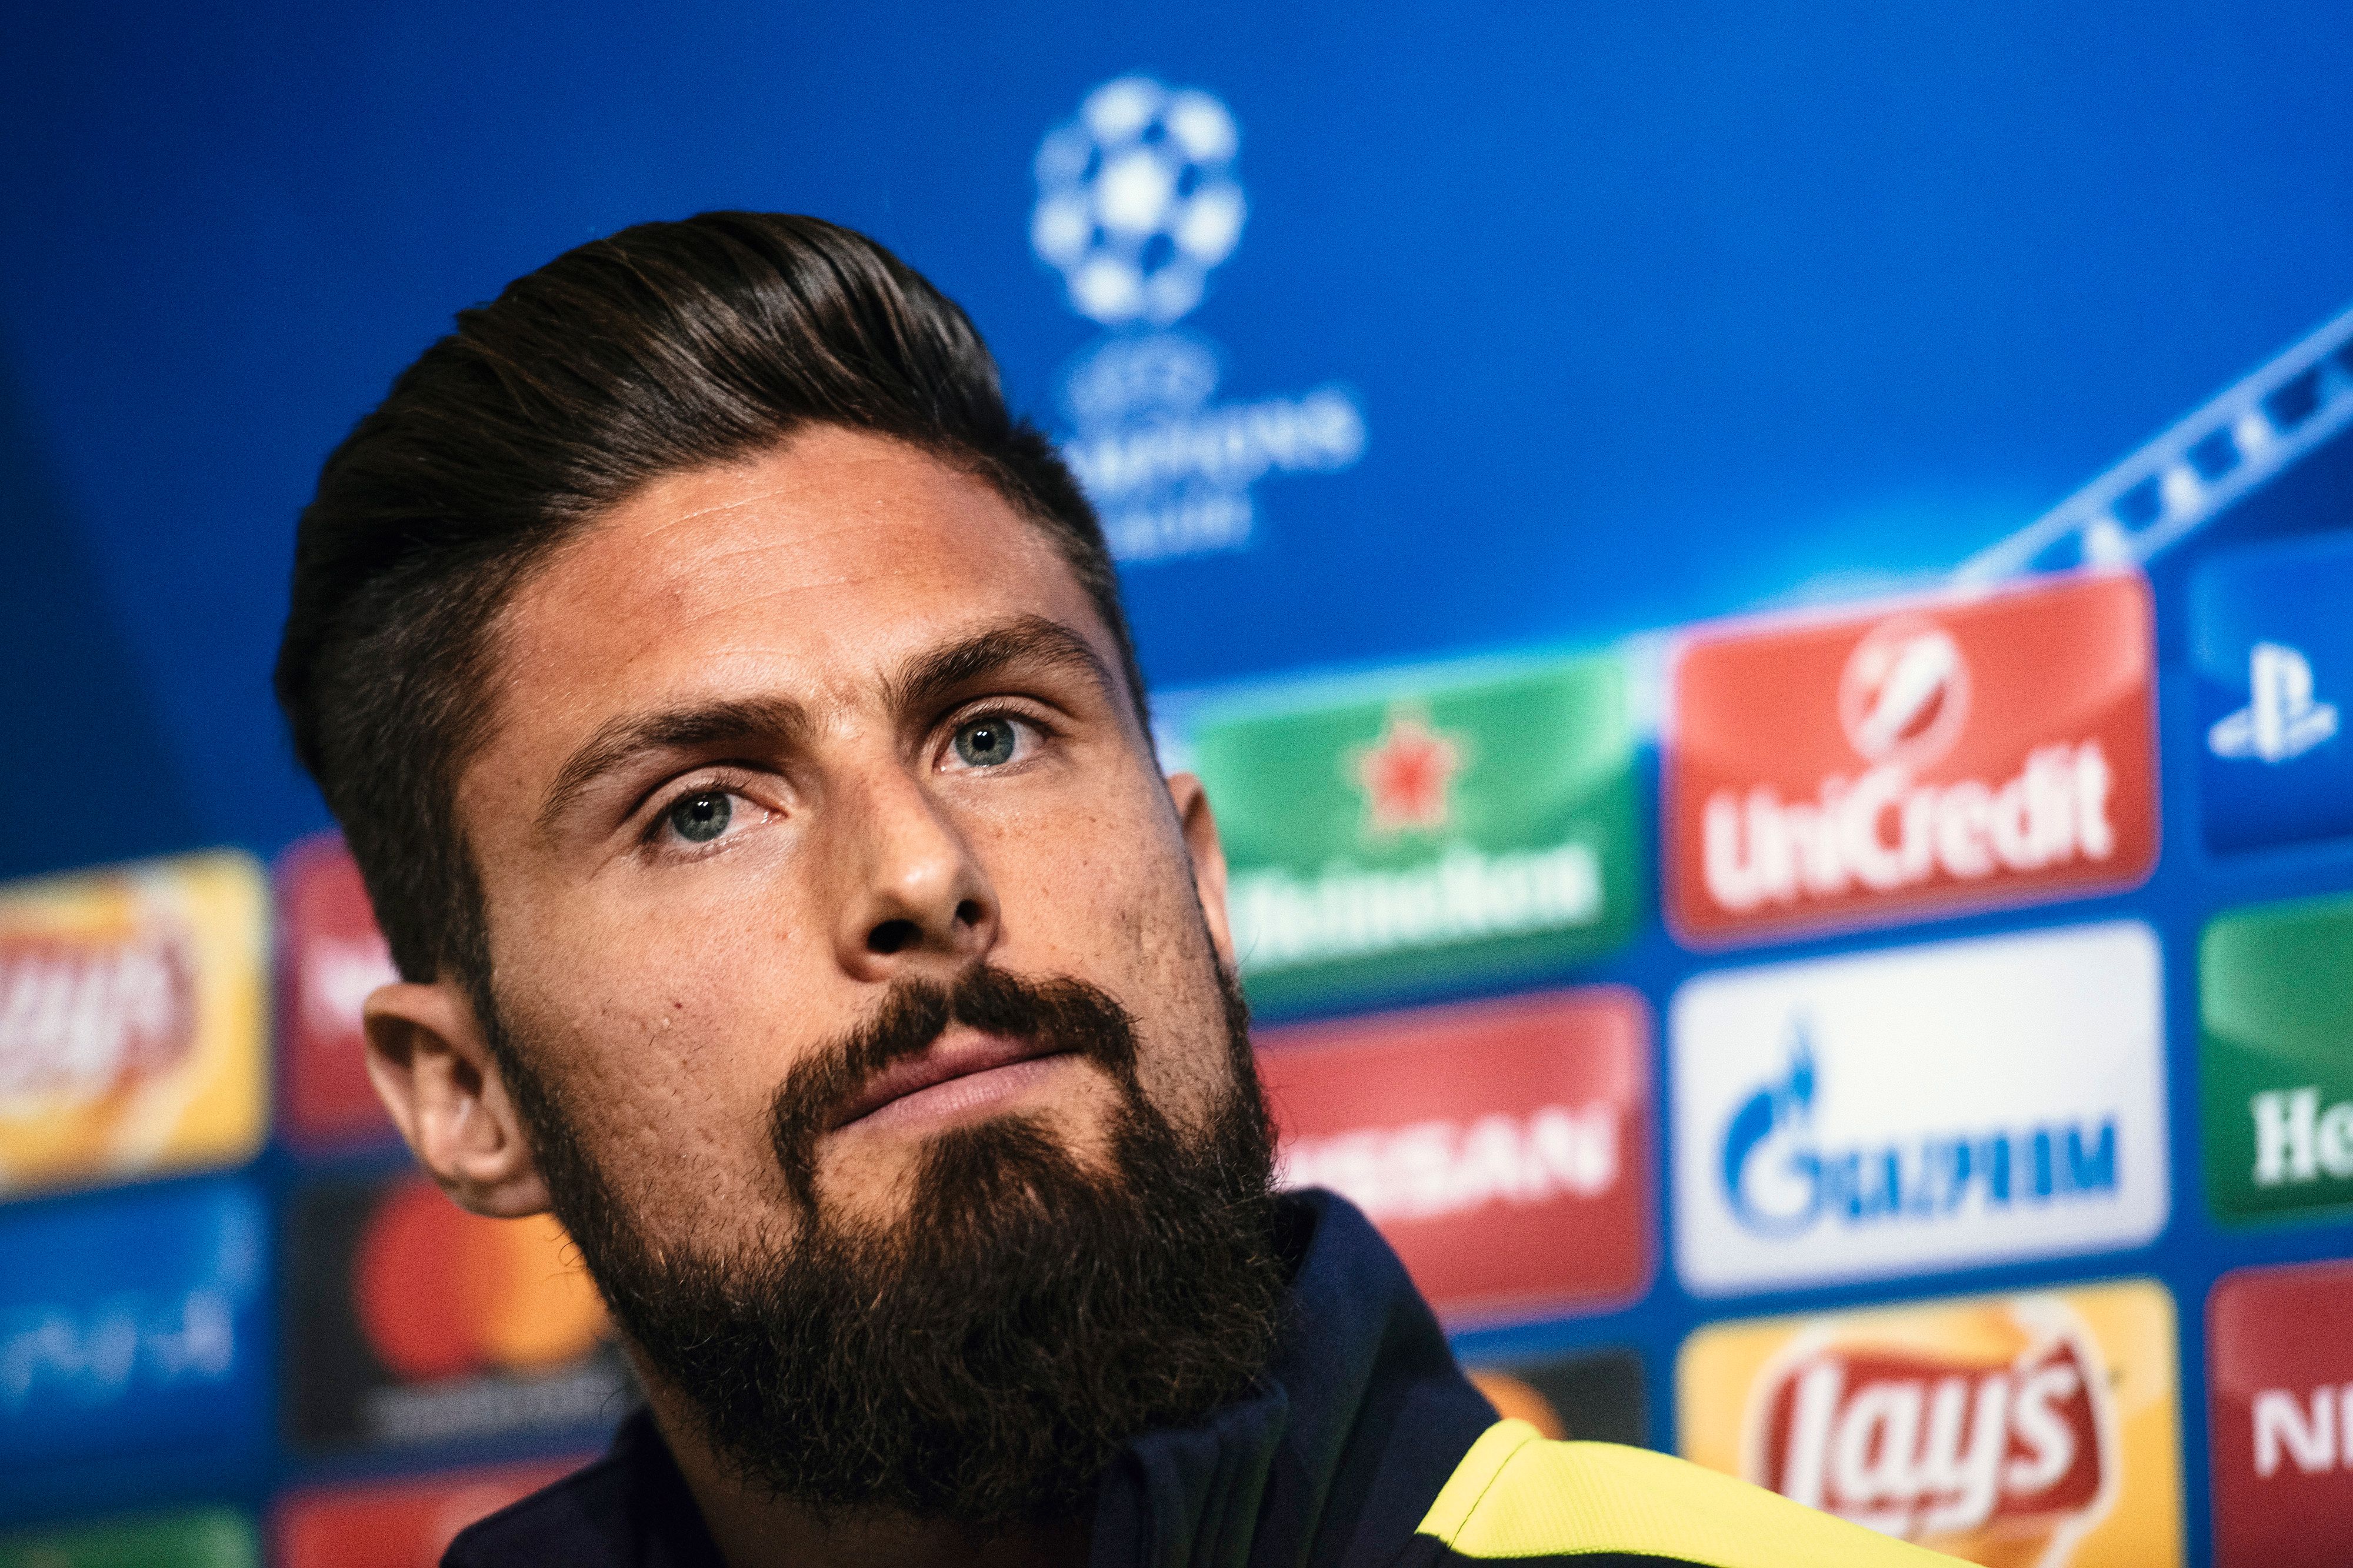 Arsenal's French forward Olivier Giroud gives a press conference on the eve of the UEFA Champions League group A football match between Ludogorets and Arsenal in Sofia on October 31, 2016.   / AFP / DIMITAR DILKOFF        (Photo credit should read DIMITAR DILKOFF/AFP/Getty Images)